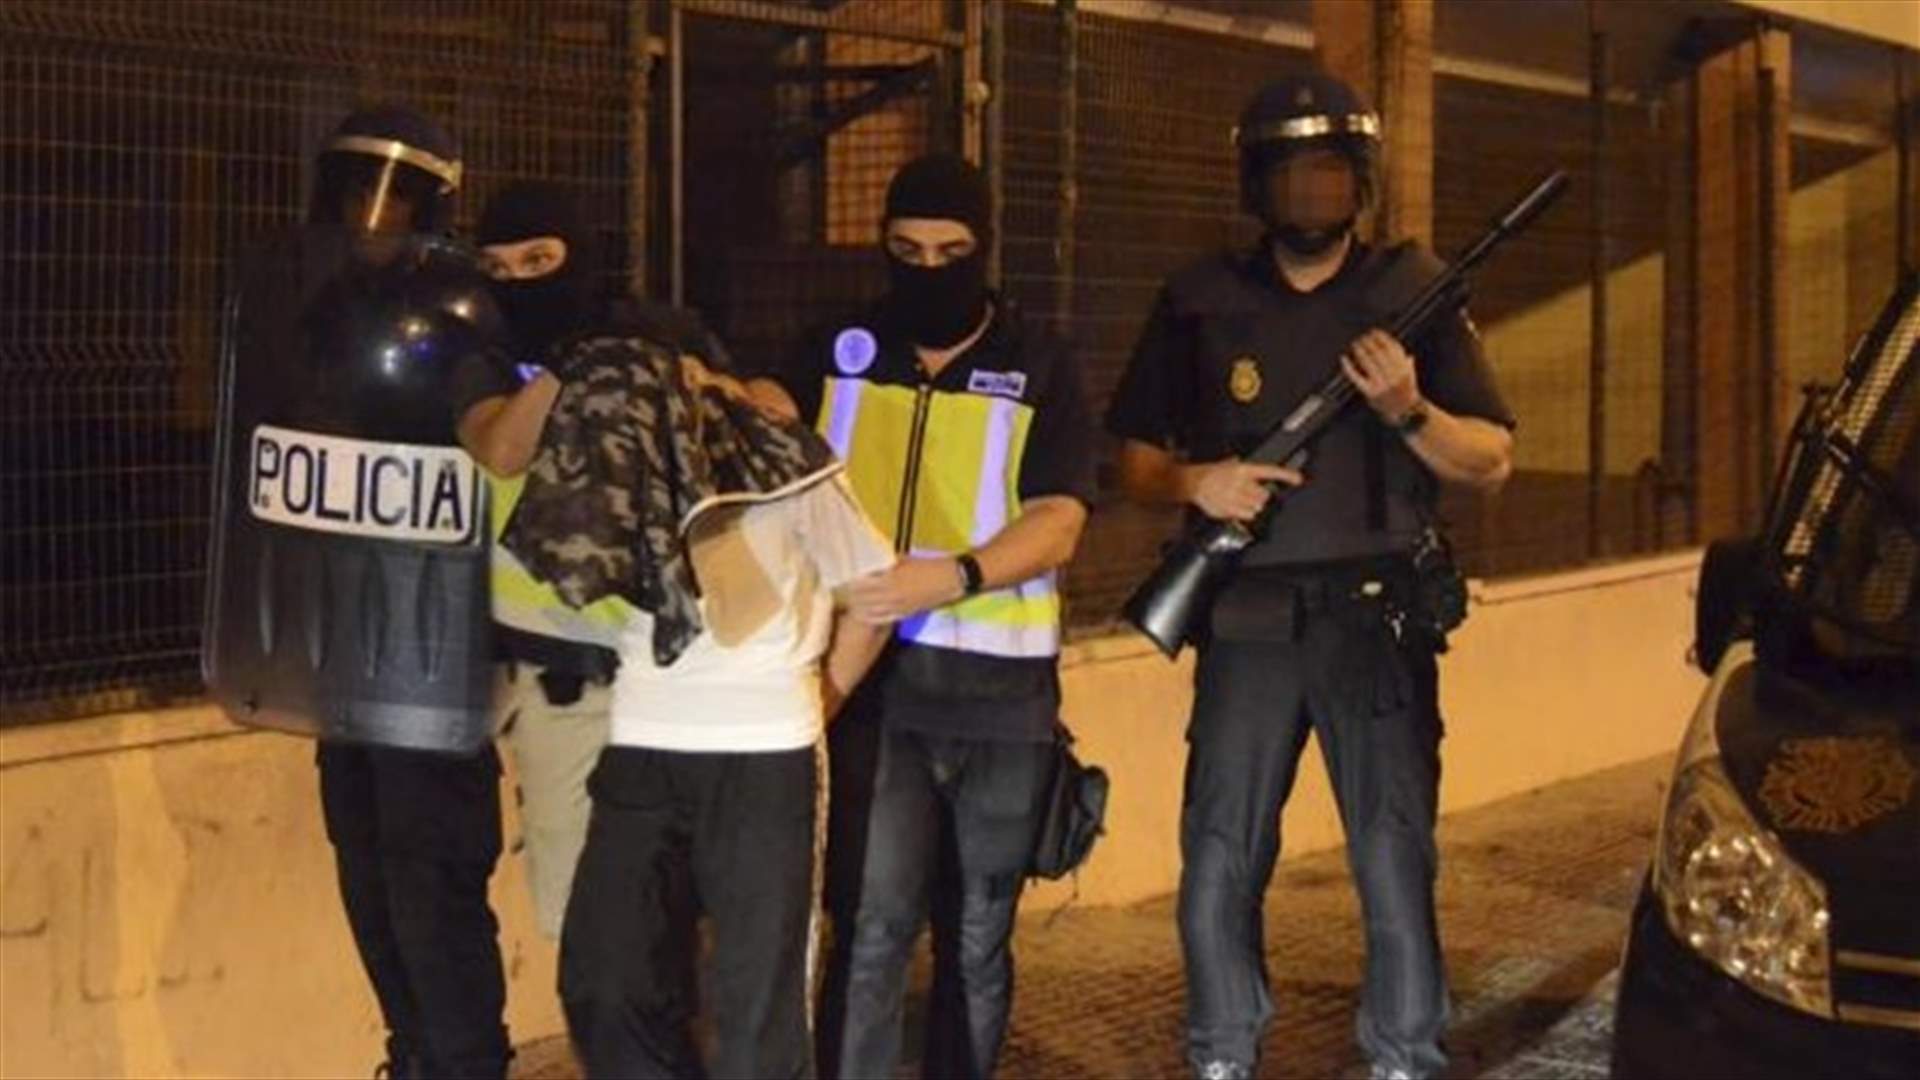 Spanish police arrest 2 Moroccans accused of funding Islamic State